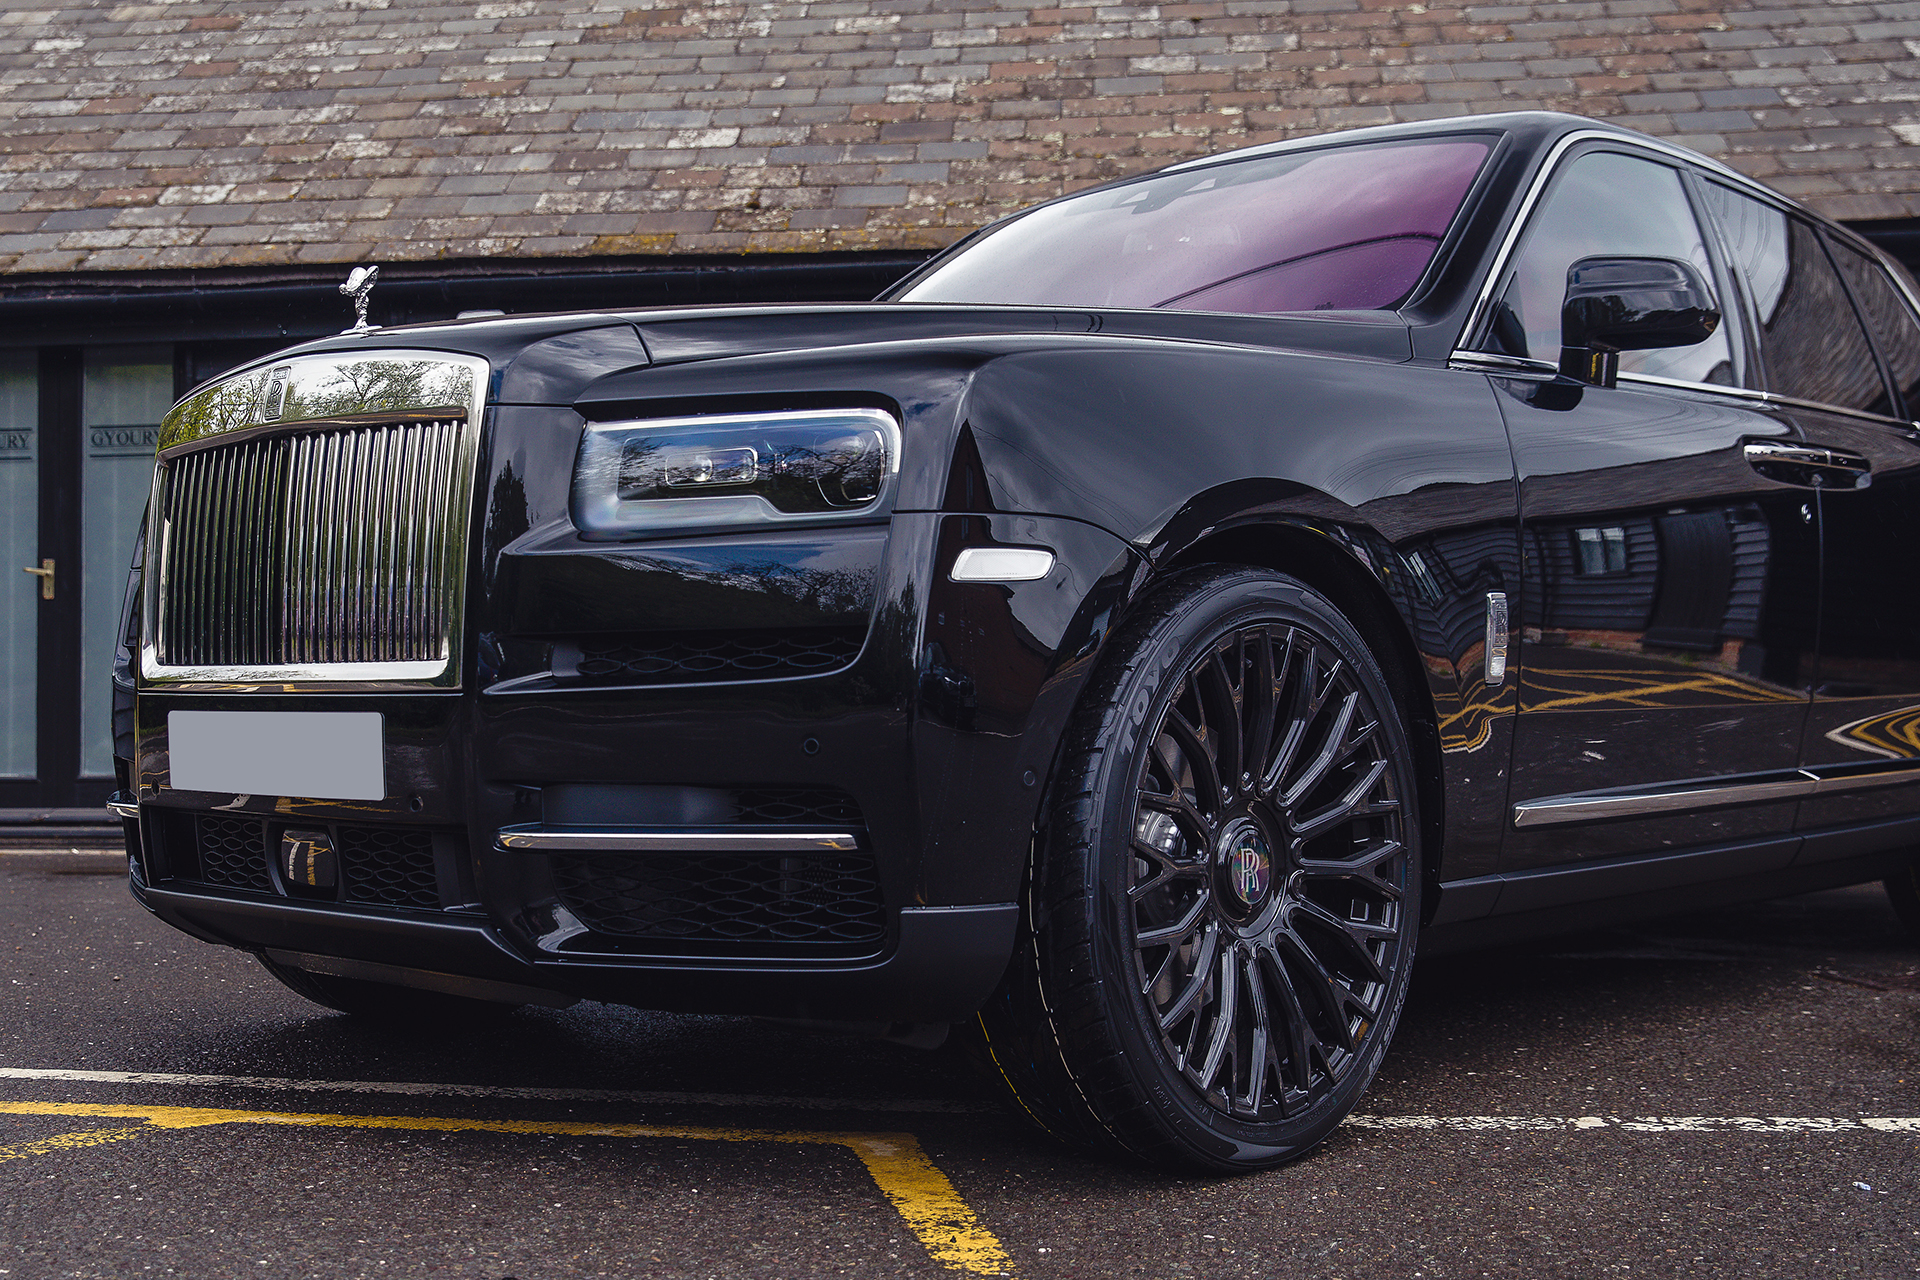 bao mike tyson surprised the world when he gave a rolls royce cullinan to his best friend for helping him find himself after bankruptcy 65339ed1c8806 Mike Tyson Surprised The World When He Gave A Rolls-royce Cullinan To His Best Friend For Helping Him Find Himself After Bankruptcy.